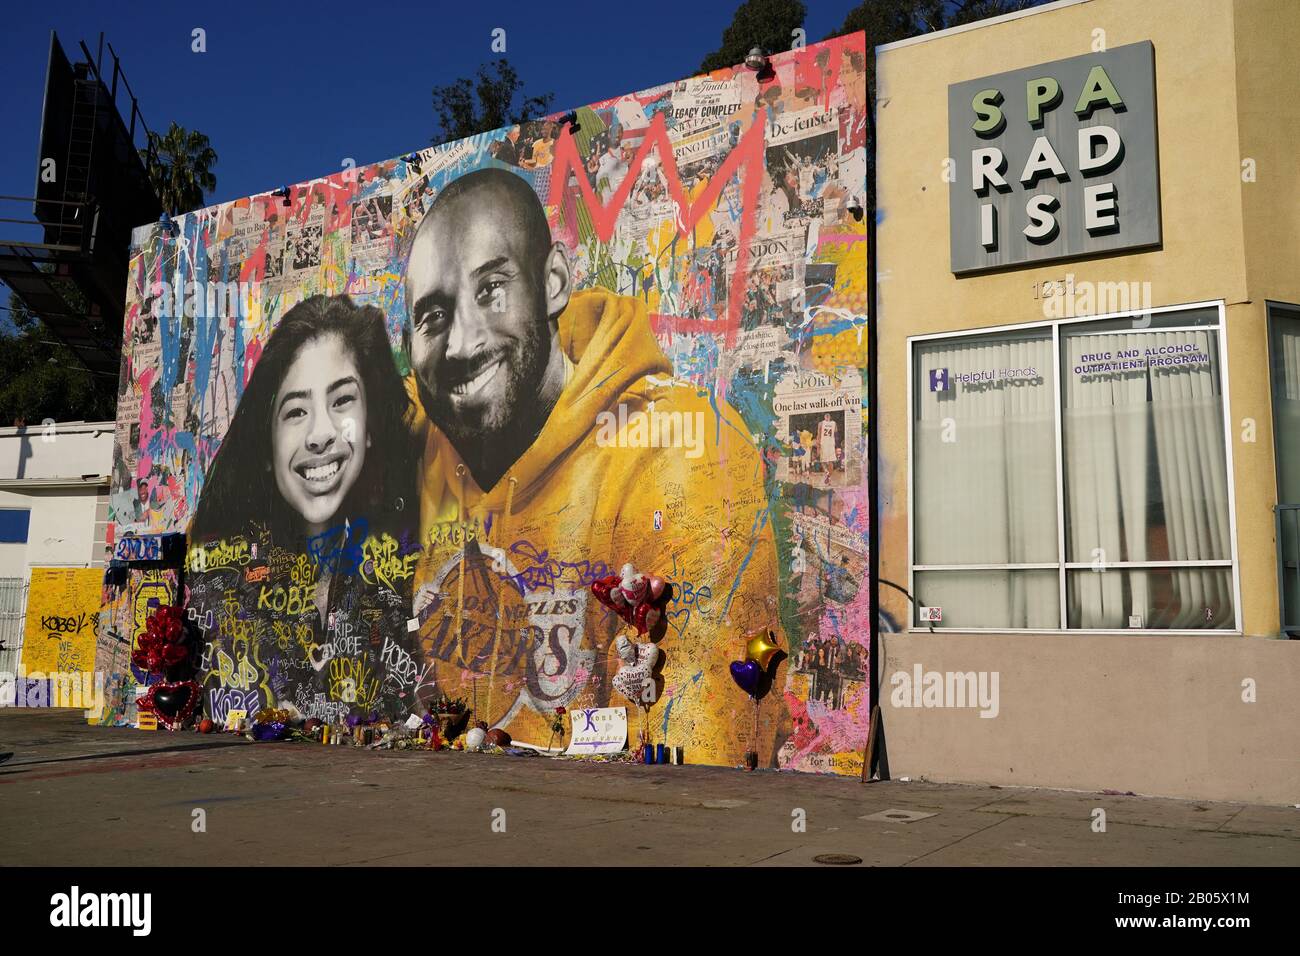 General overall view of Kobe Bryant memorial mural at Sparadise La Brea at 1251 St. La Brea Ave., Sunday, Feb 16, 2020, in Los Angeles. The mural, created street artist Thierry Guetta aka Mr. Brainwash, showcases Bryant and his daughter Gigi Bryant (Gianna Bryant), with the former basketball player wearing a Lakers sweatshirt against a colorful background and newspaper images of Bryant during his NBA years, on the front. There is another image of Bryant in his purple Lakers uniform with a quote of his written next to him on the side of the building. This mural also pays tribute to the other se Stock Photo